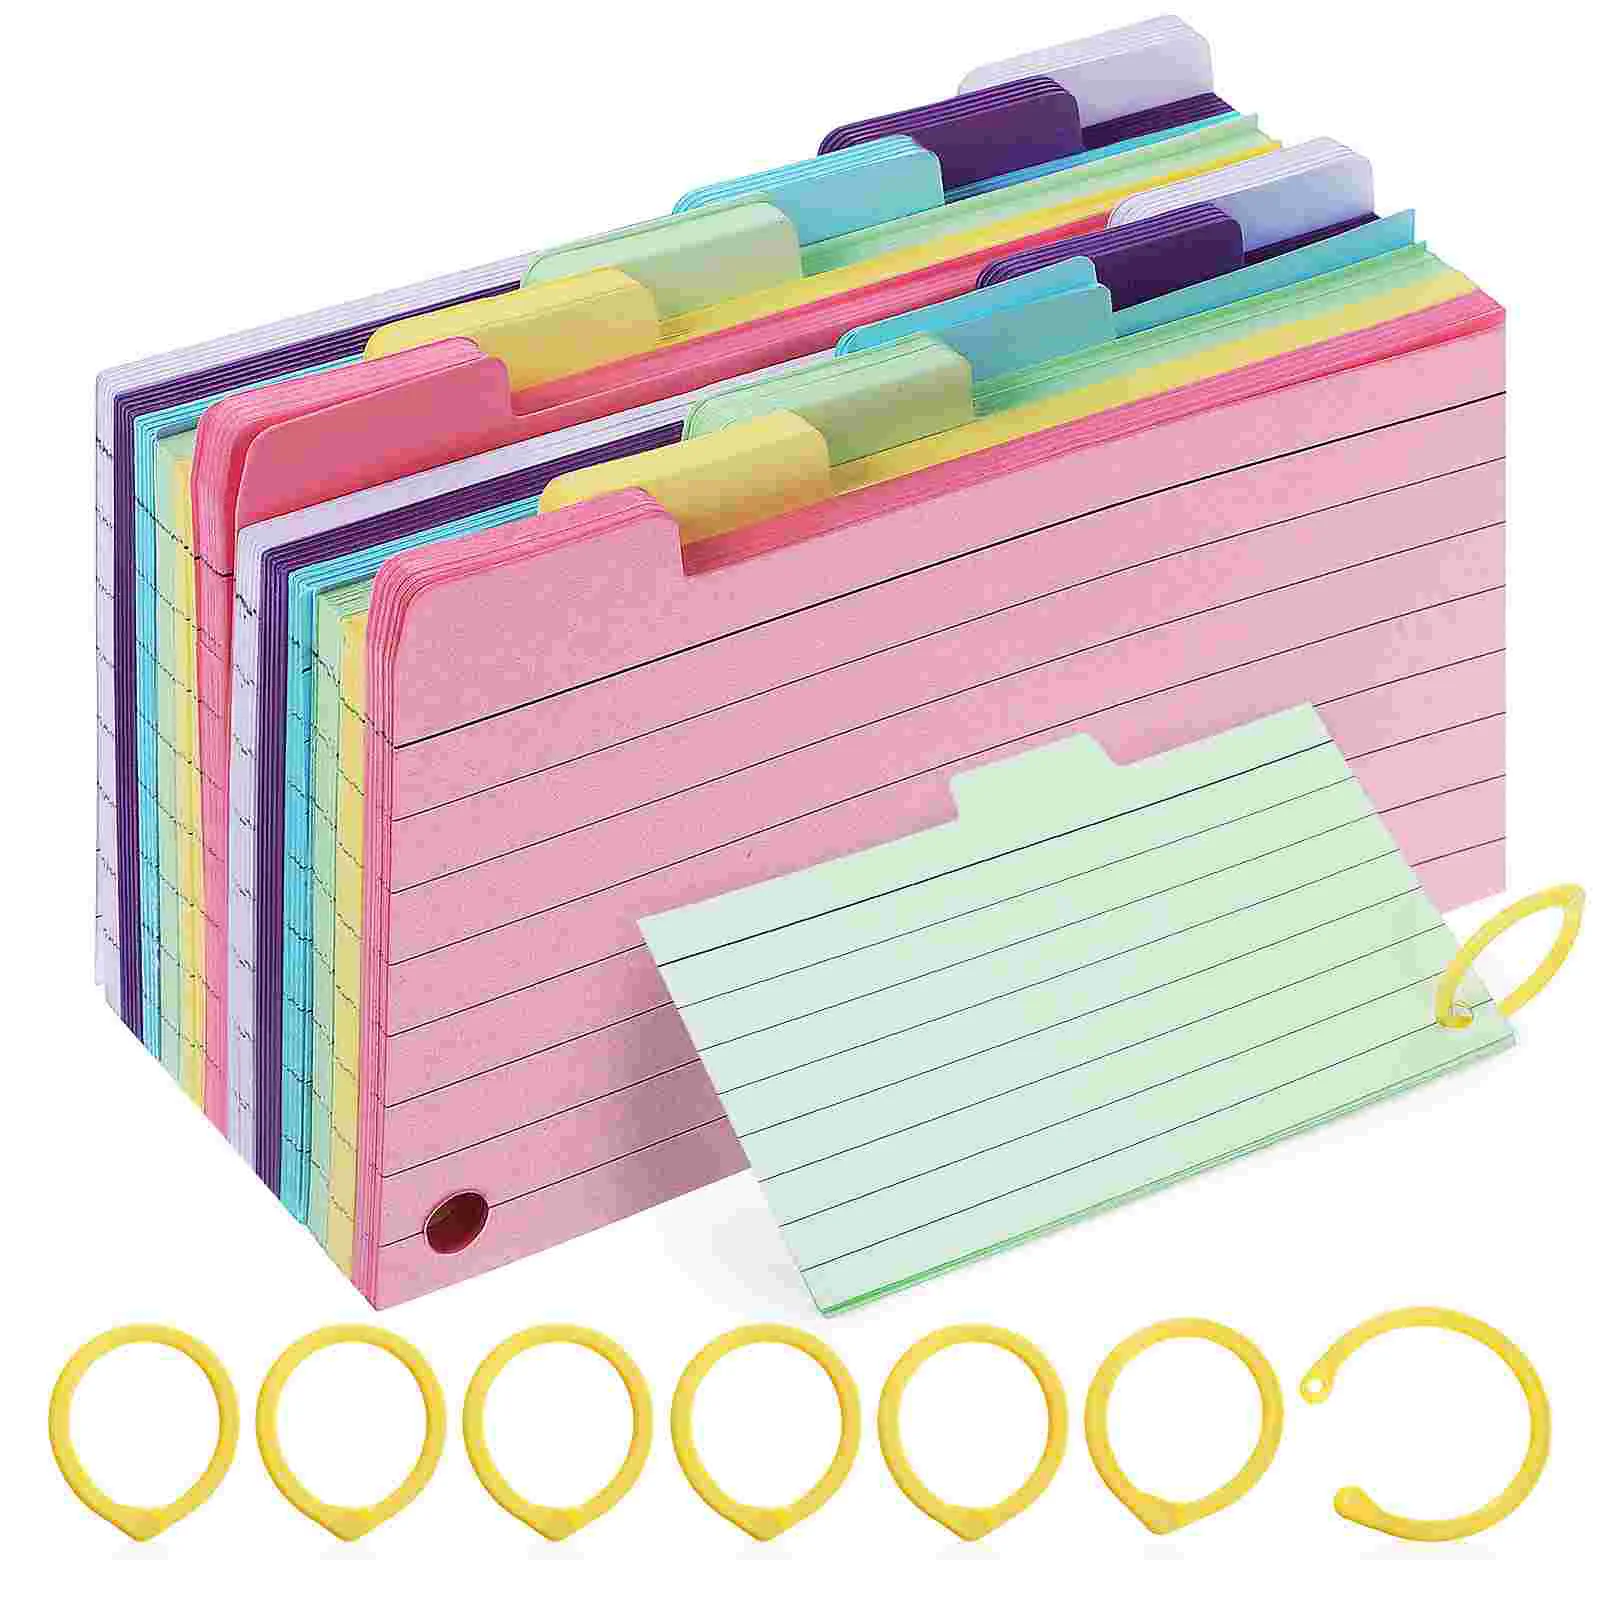 

450Pcs Small Memo Pads Lined Notepads Spiral Flash Cards with 8 Binder Rings for Note Taking